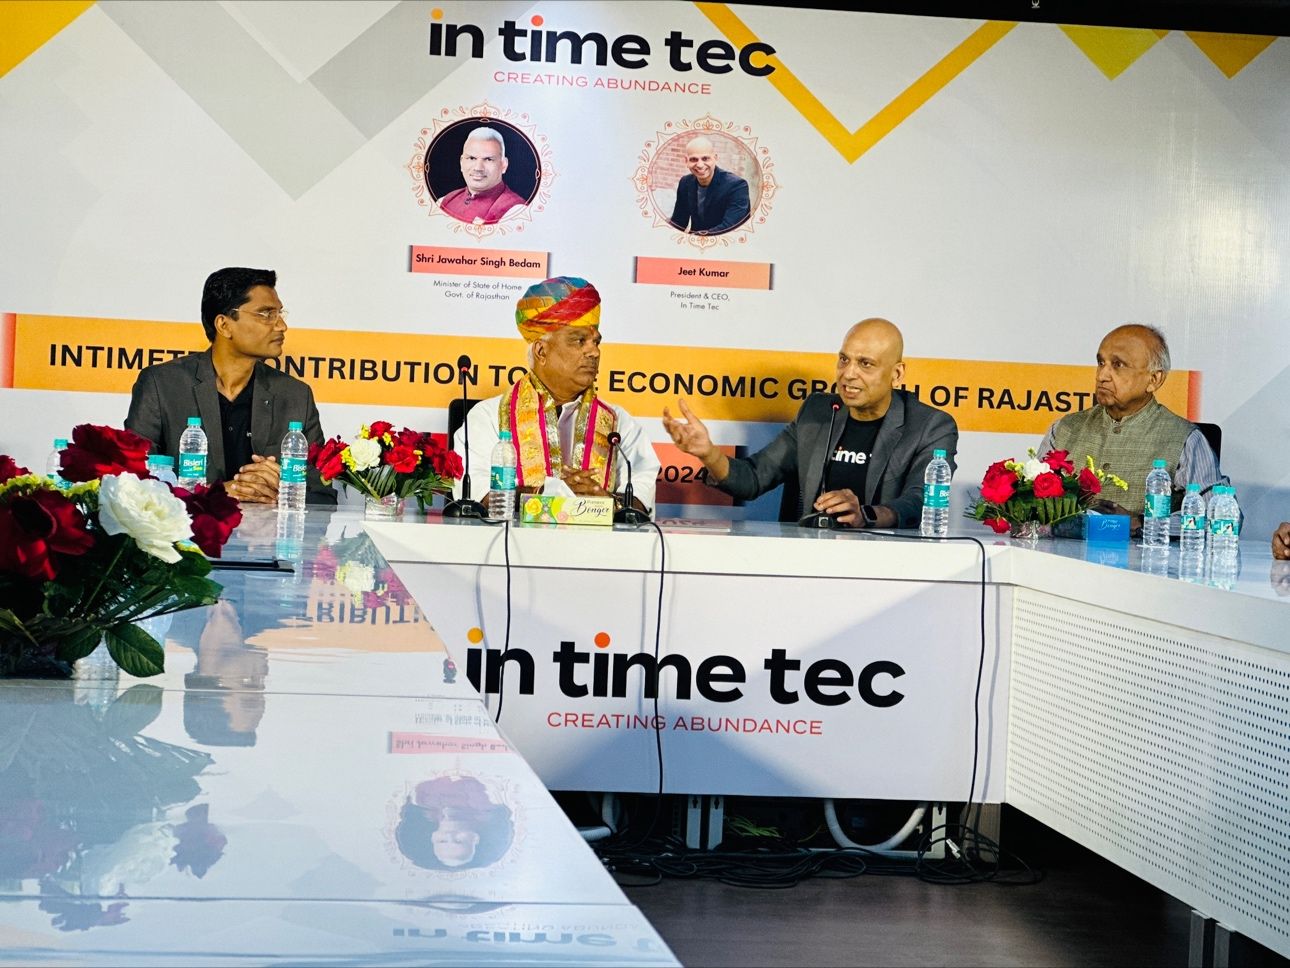 IN TIME TEC contribution to the Economic Growth of Rajasthan